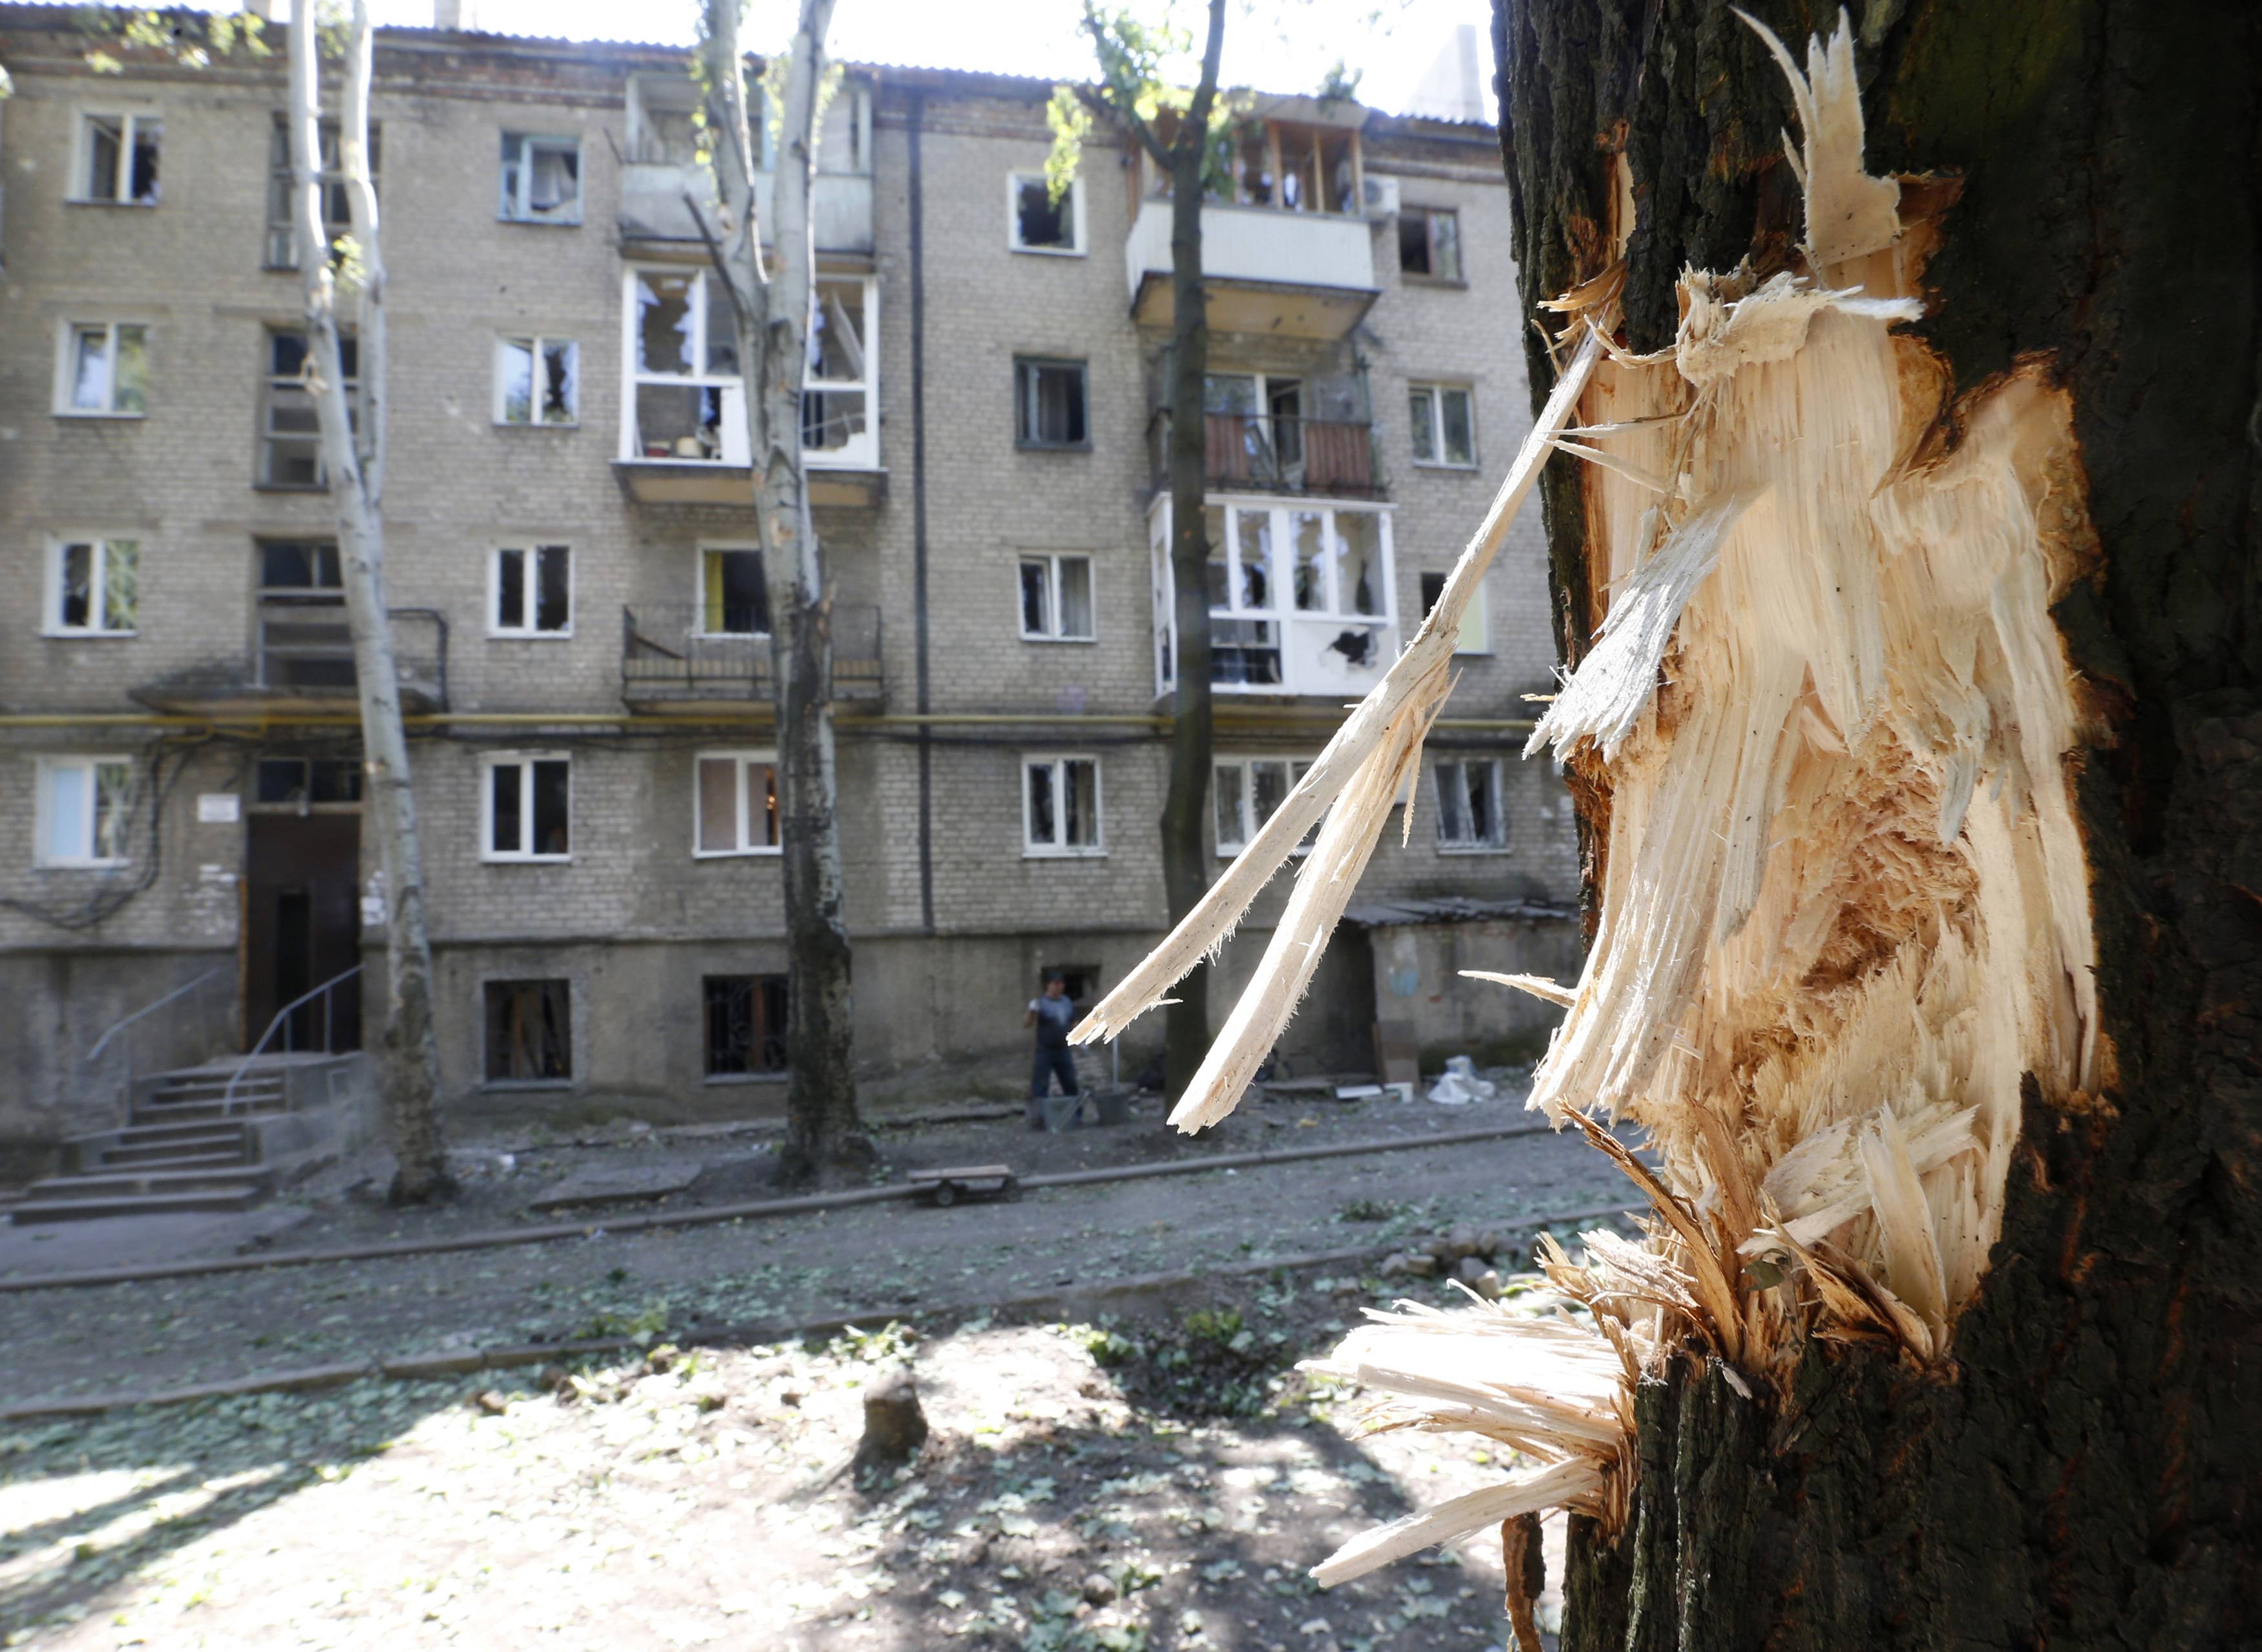 Results of shelling committed by Ukrainian fighters at Donetsk